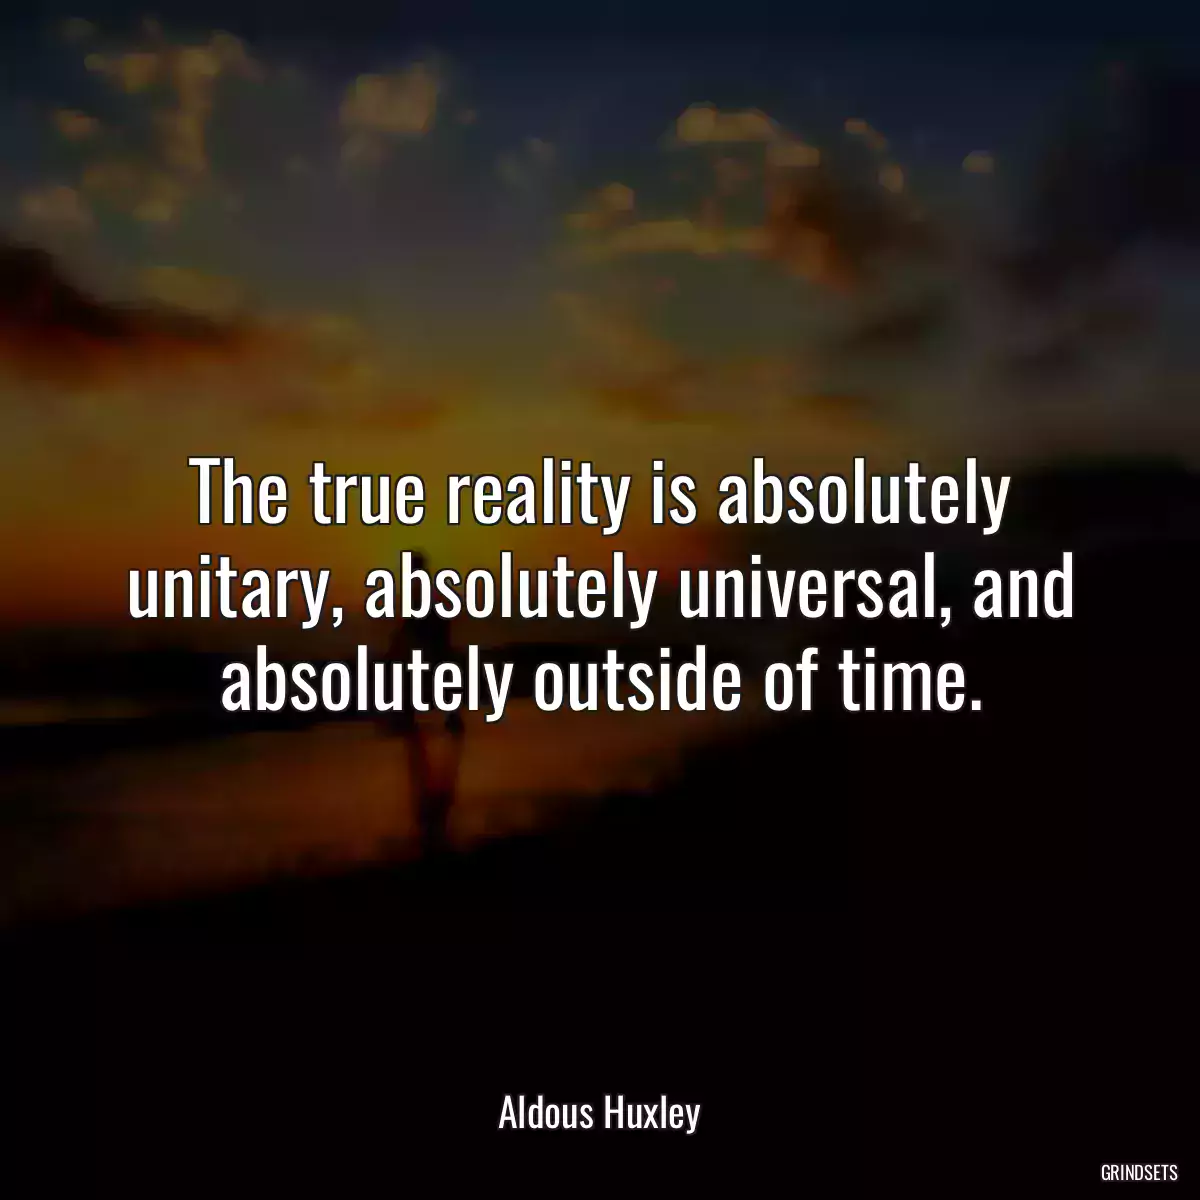 The true reality is absolutely unitary, absolutely universal, and absolutely outside of time.